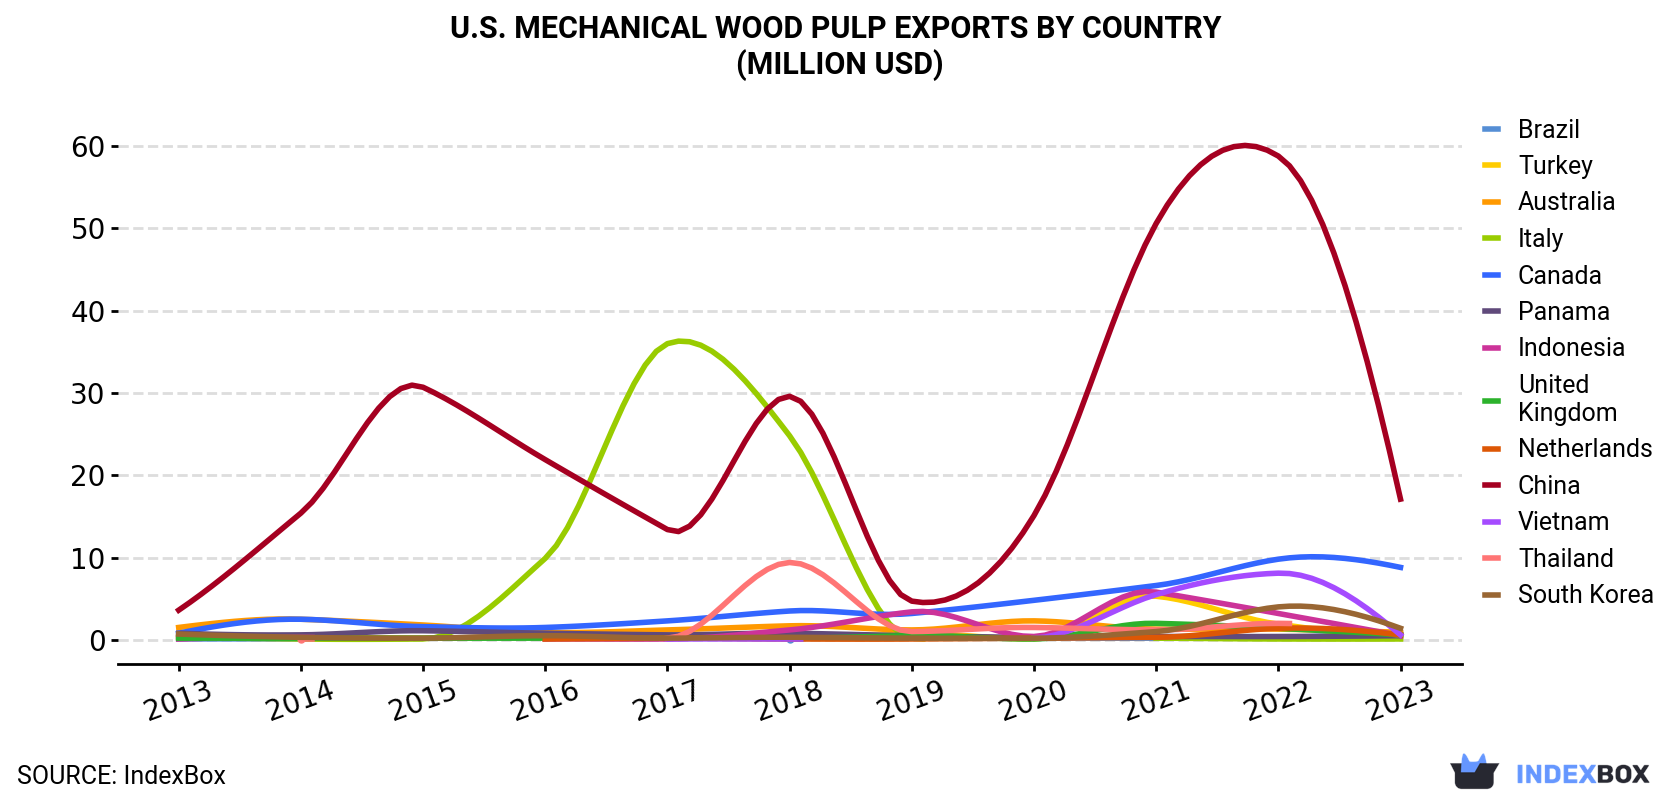 U.S. Mechanical Wood Pulp Exports By Country (Million USD)